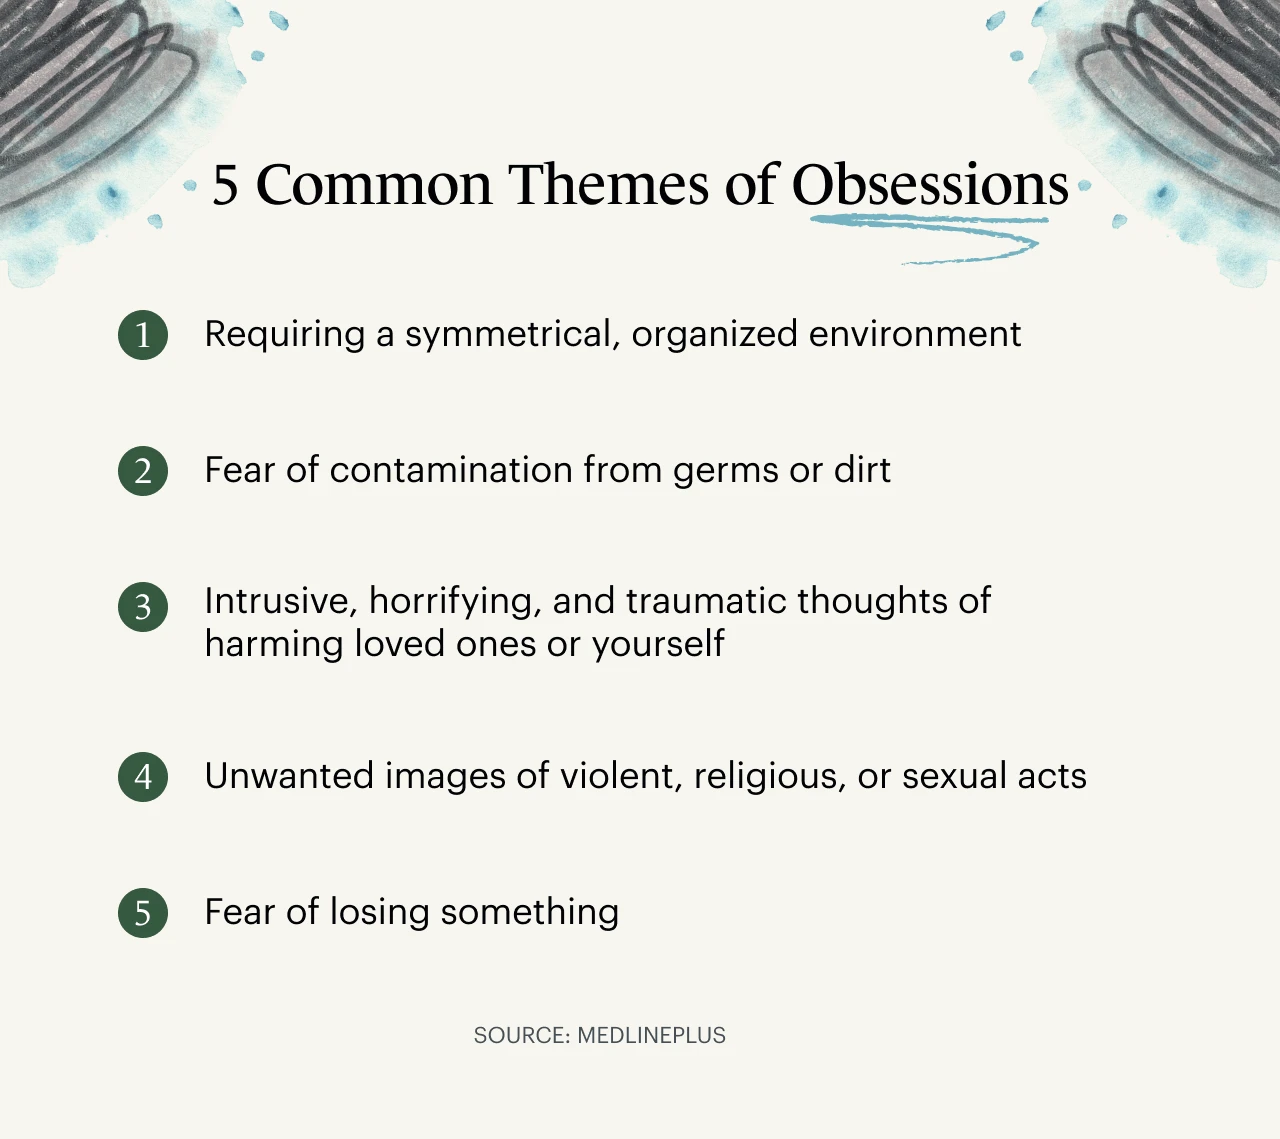 A Monarch original infographic showing five common themes of obsessions that can be ocd symptoms.